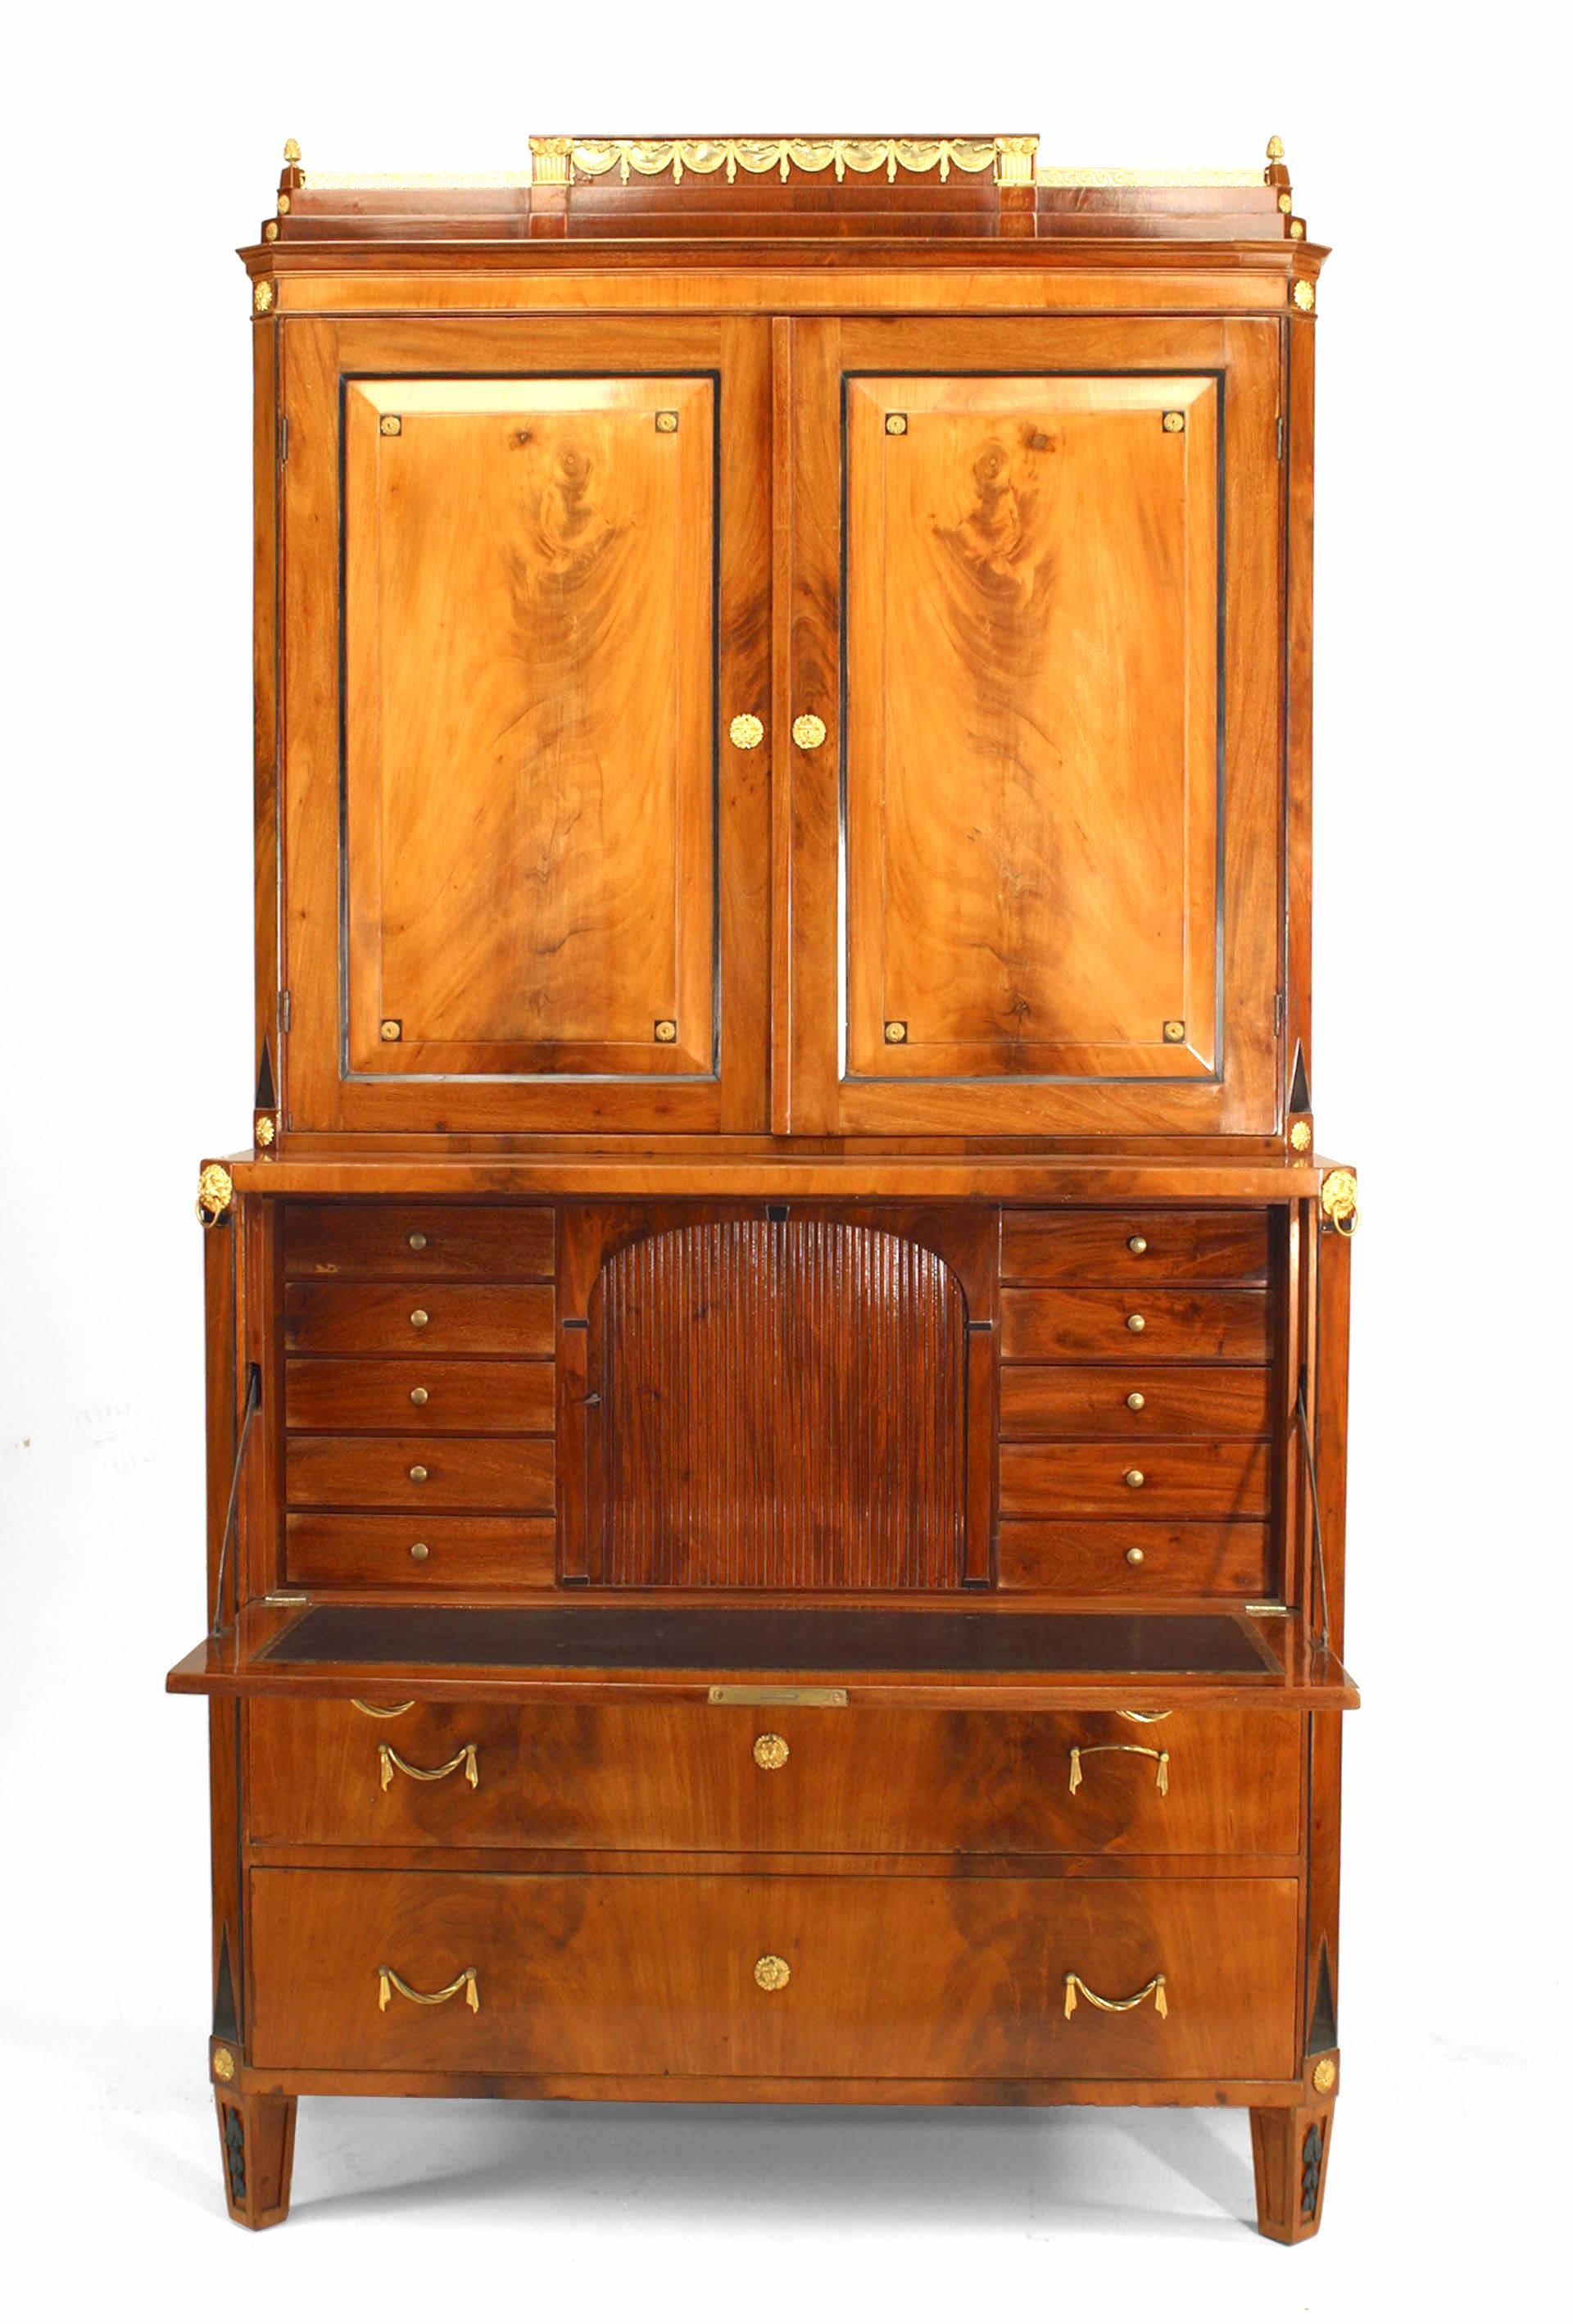 Russian Neoclassic (Late 18th/ Early 19th Century) ormolu mounted ebonized and mahogany secretaire cabinet with a Pair of doors above a fitted fall-front and 2 long drawers
